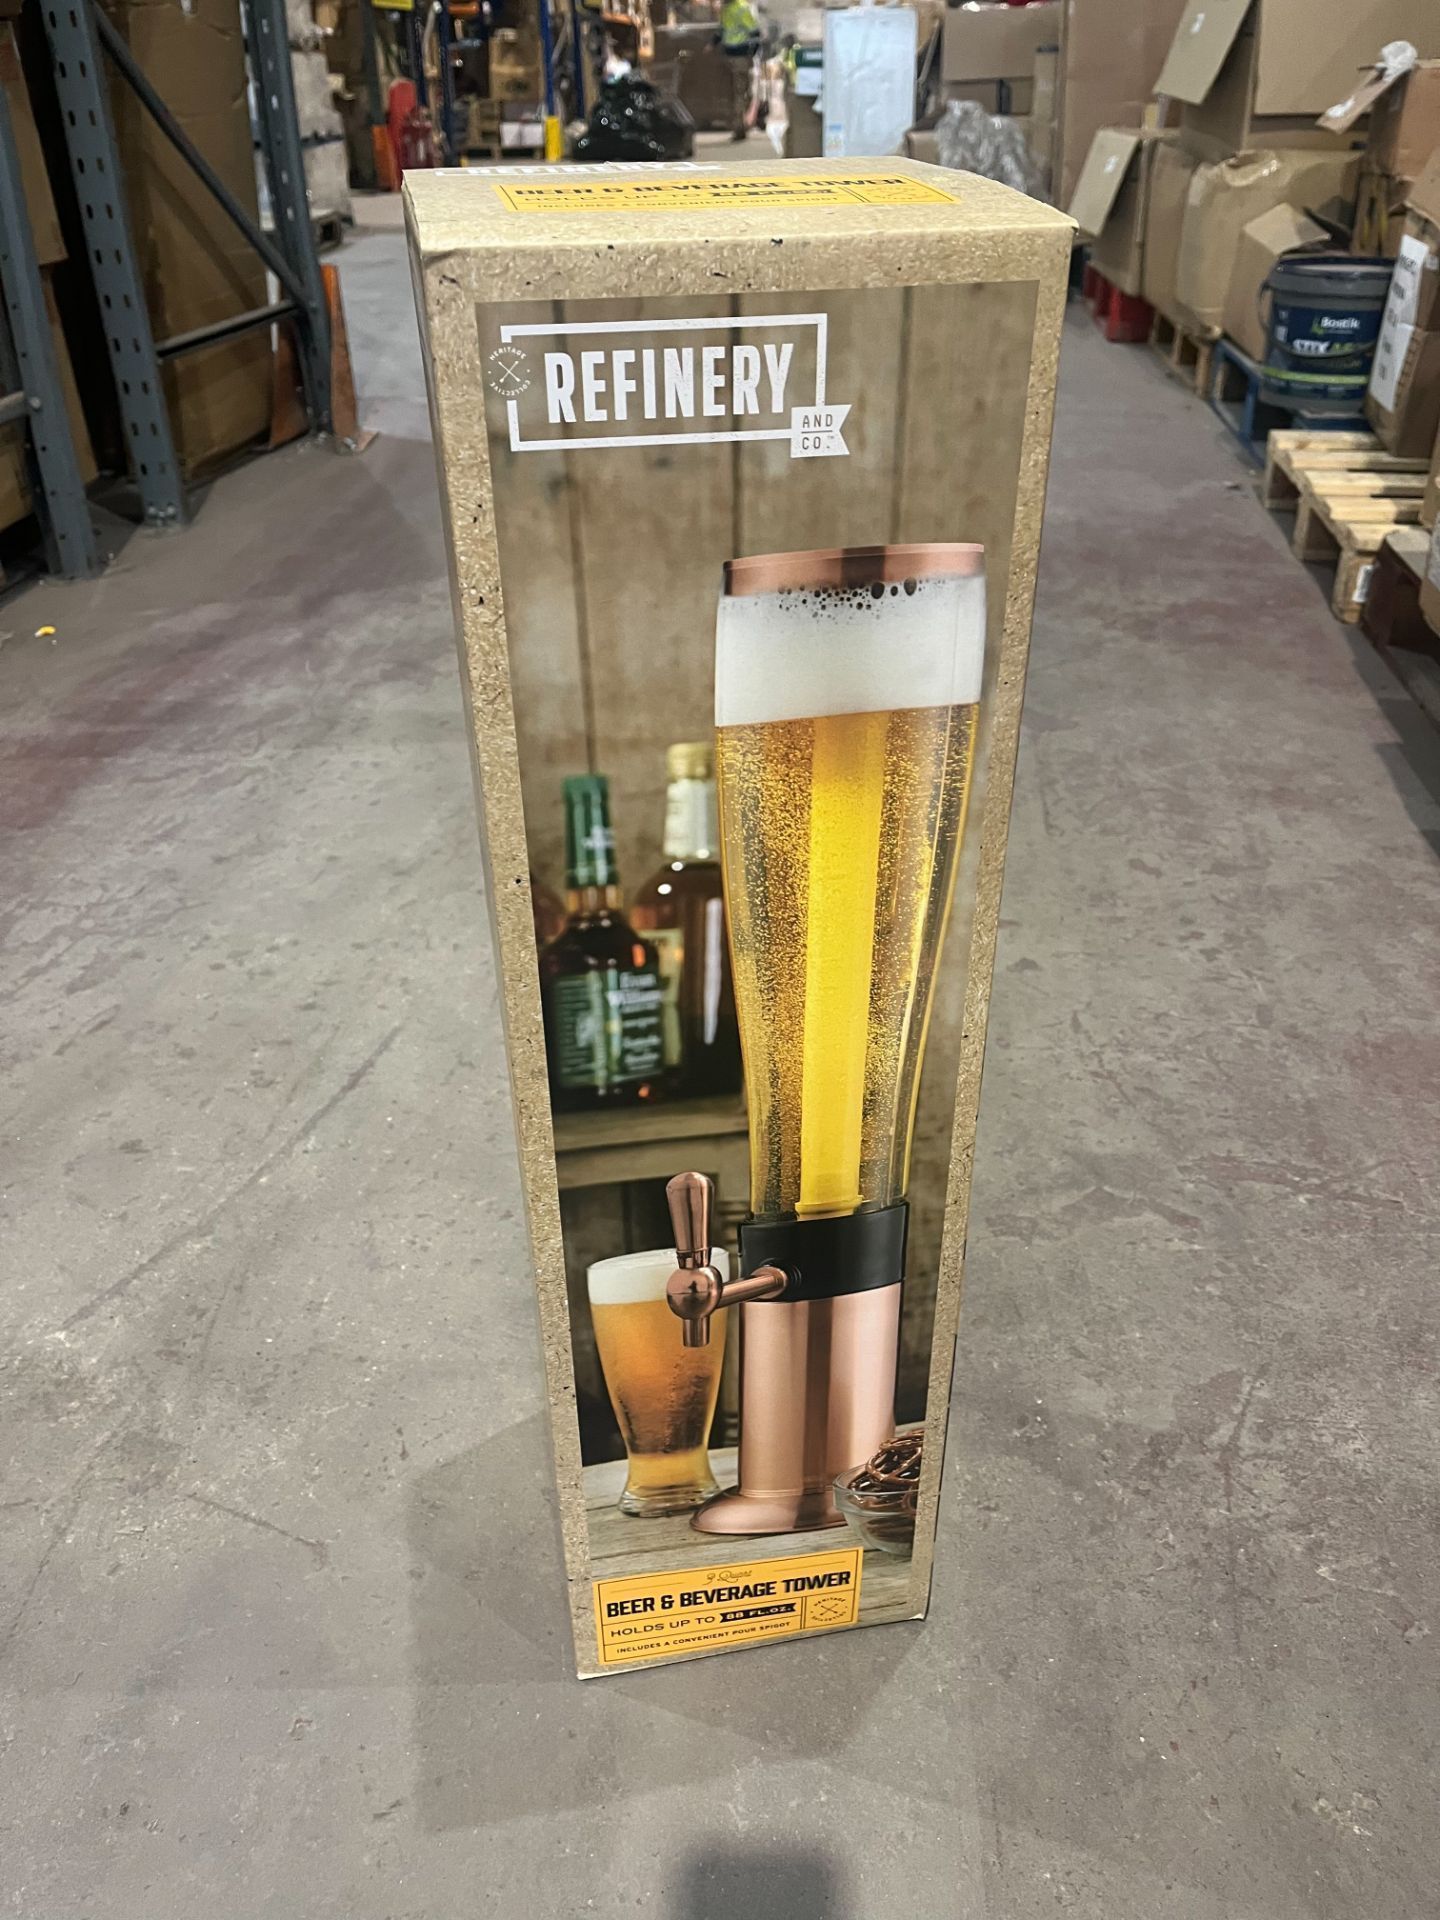 2 x New & Boxed Luxury Beer & Beverage Tower. RRP £75 each. This Beer and Beverage Tower will help